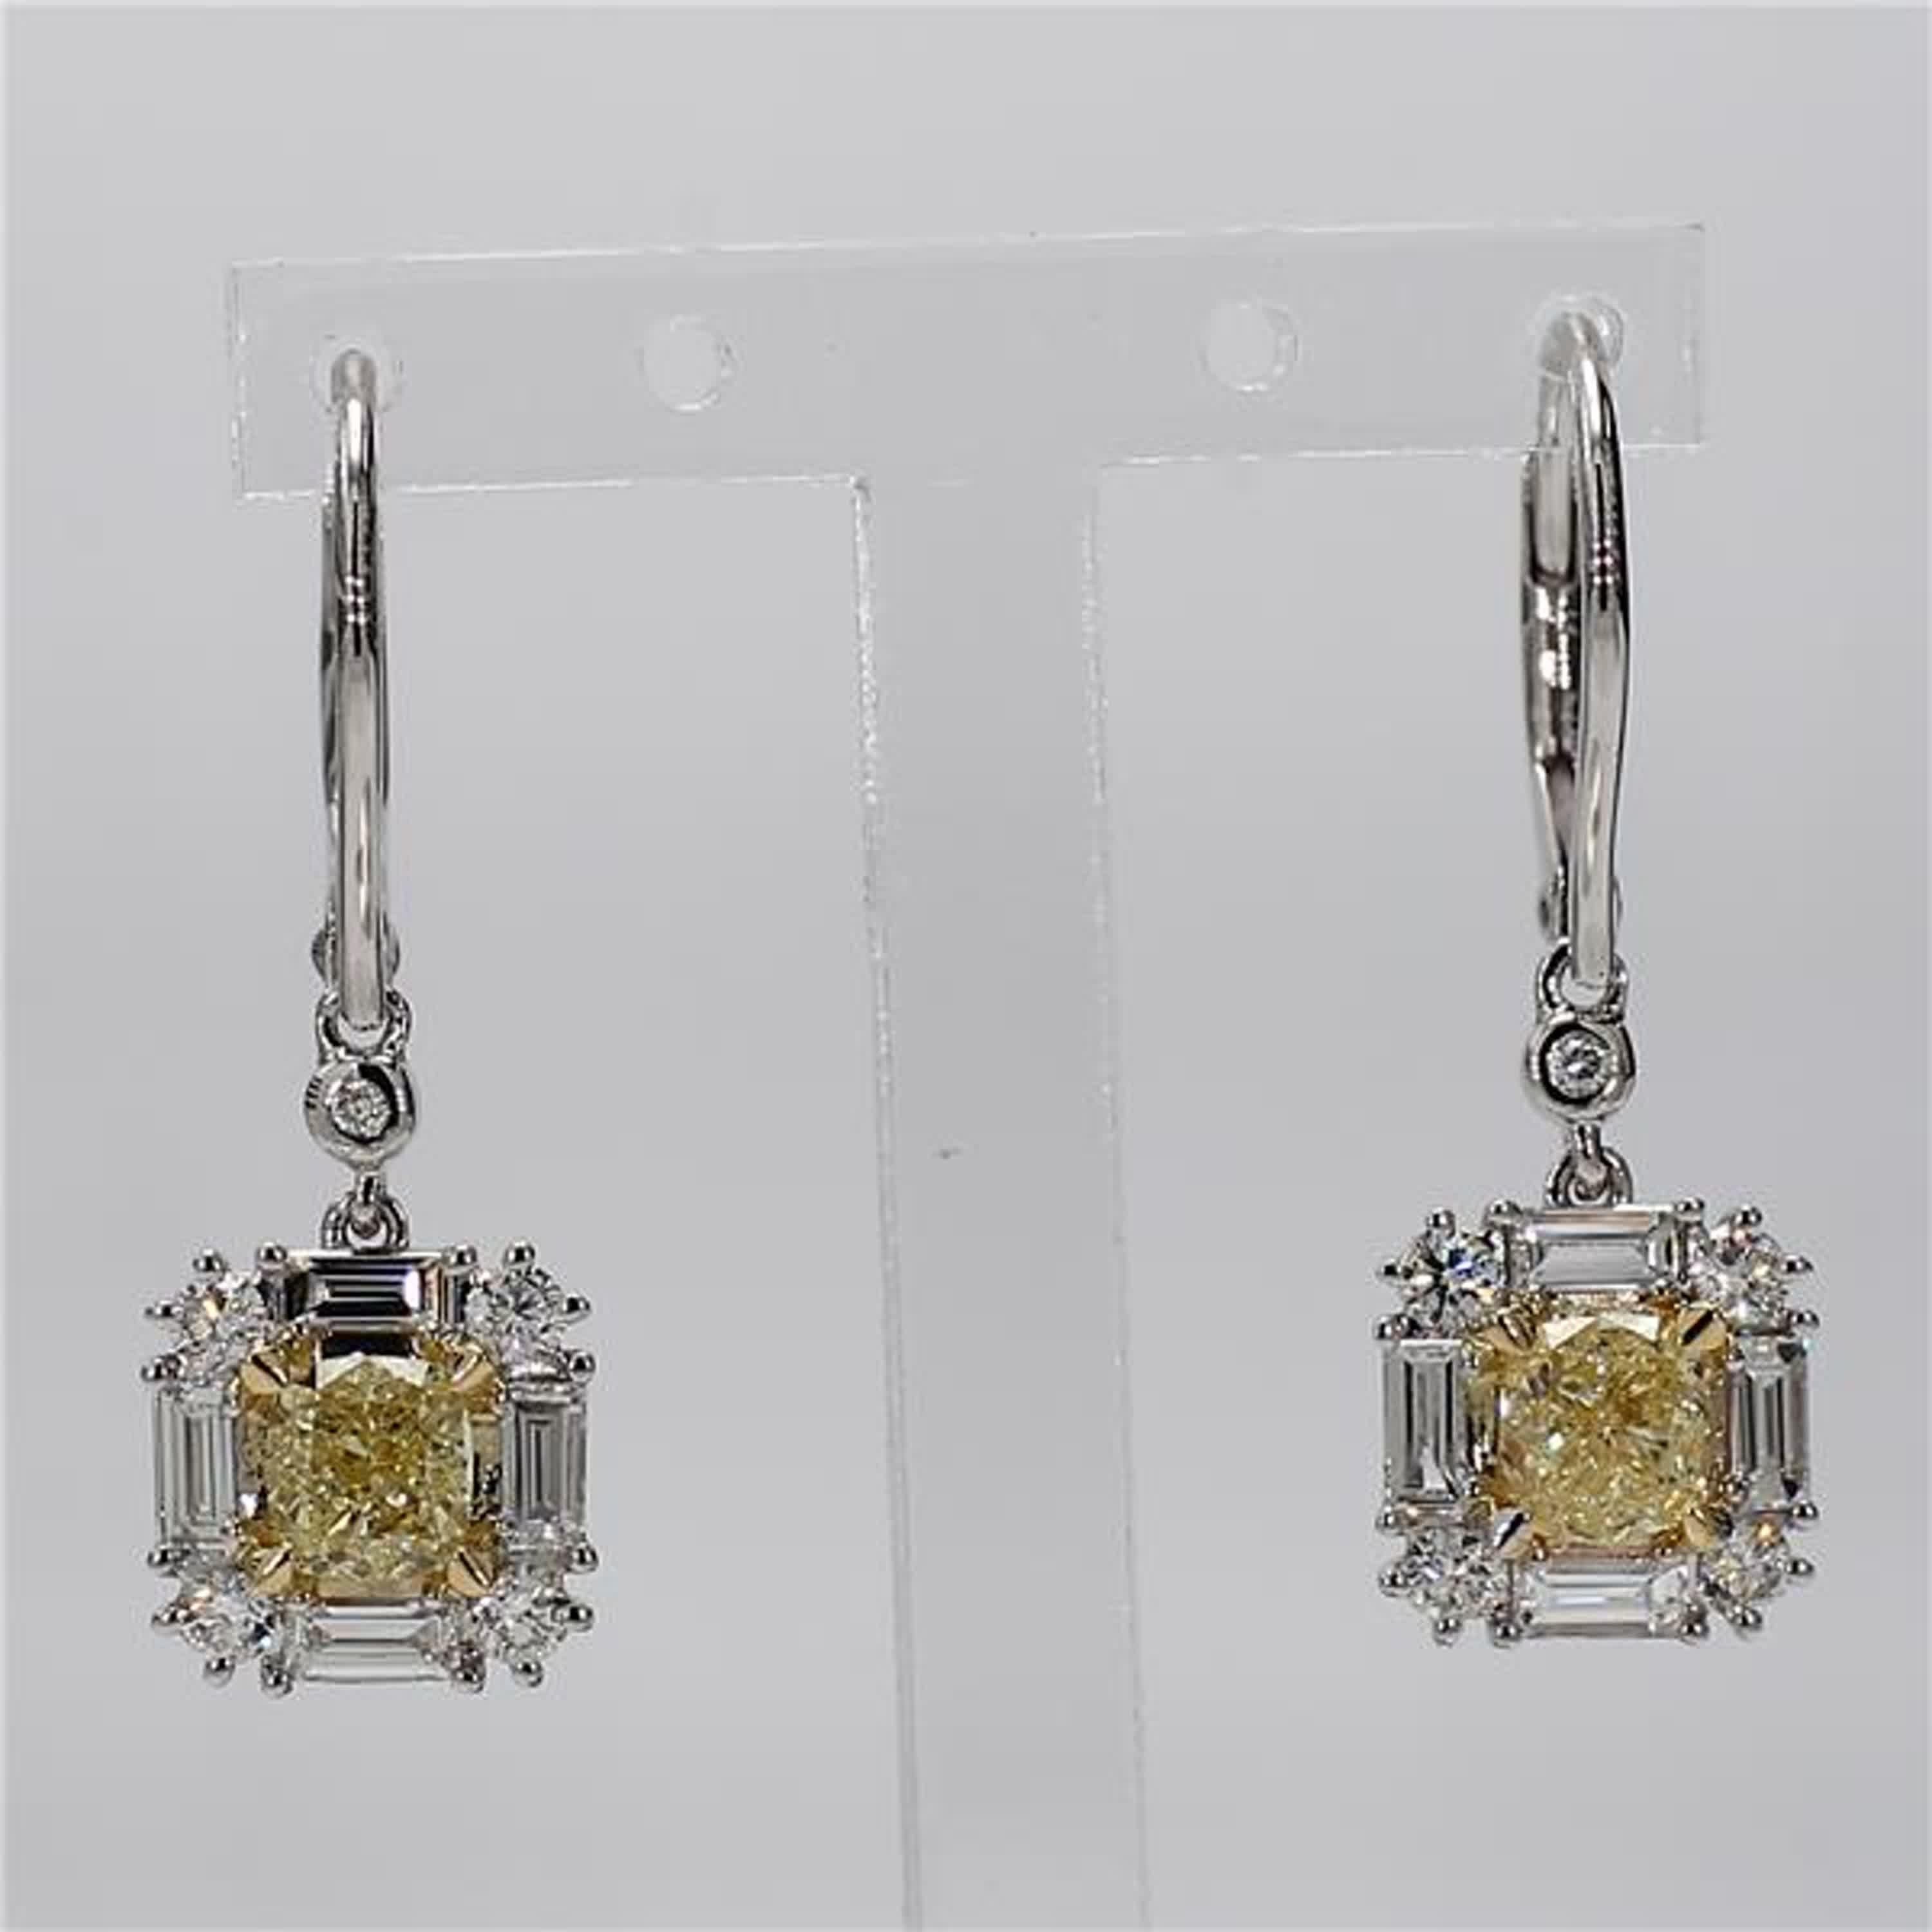 RareGemWorld's classic diamond earrings. Mounted in a beautiful 18K Yellow and White Gold setting with natural cushion cut yellow diamonds. The yellow diamonds are surrounded by small round natural white diamond melee as well as natural white